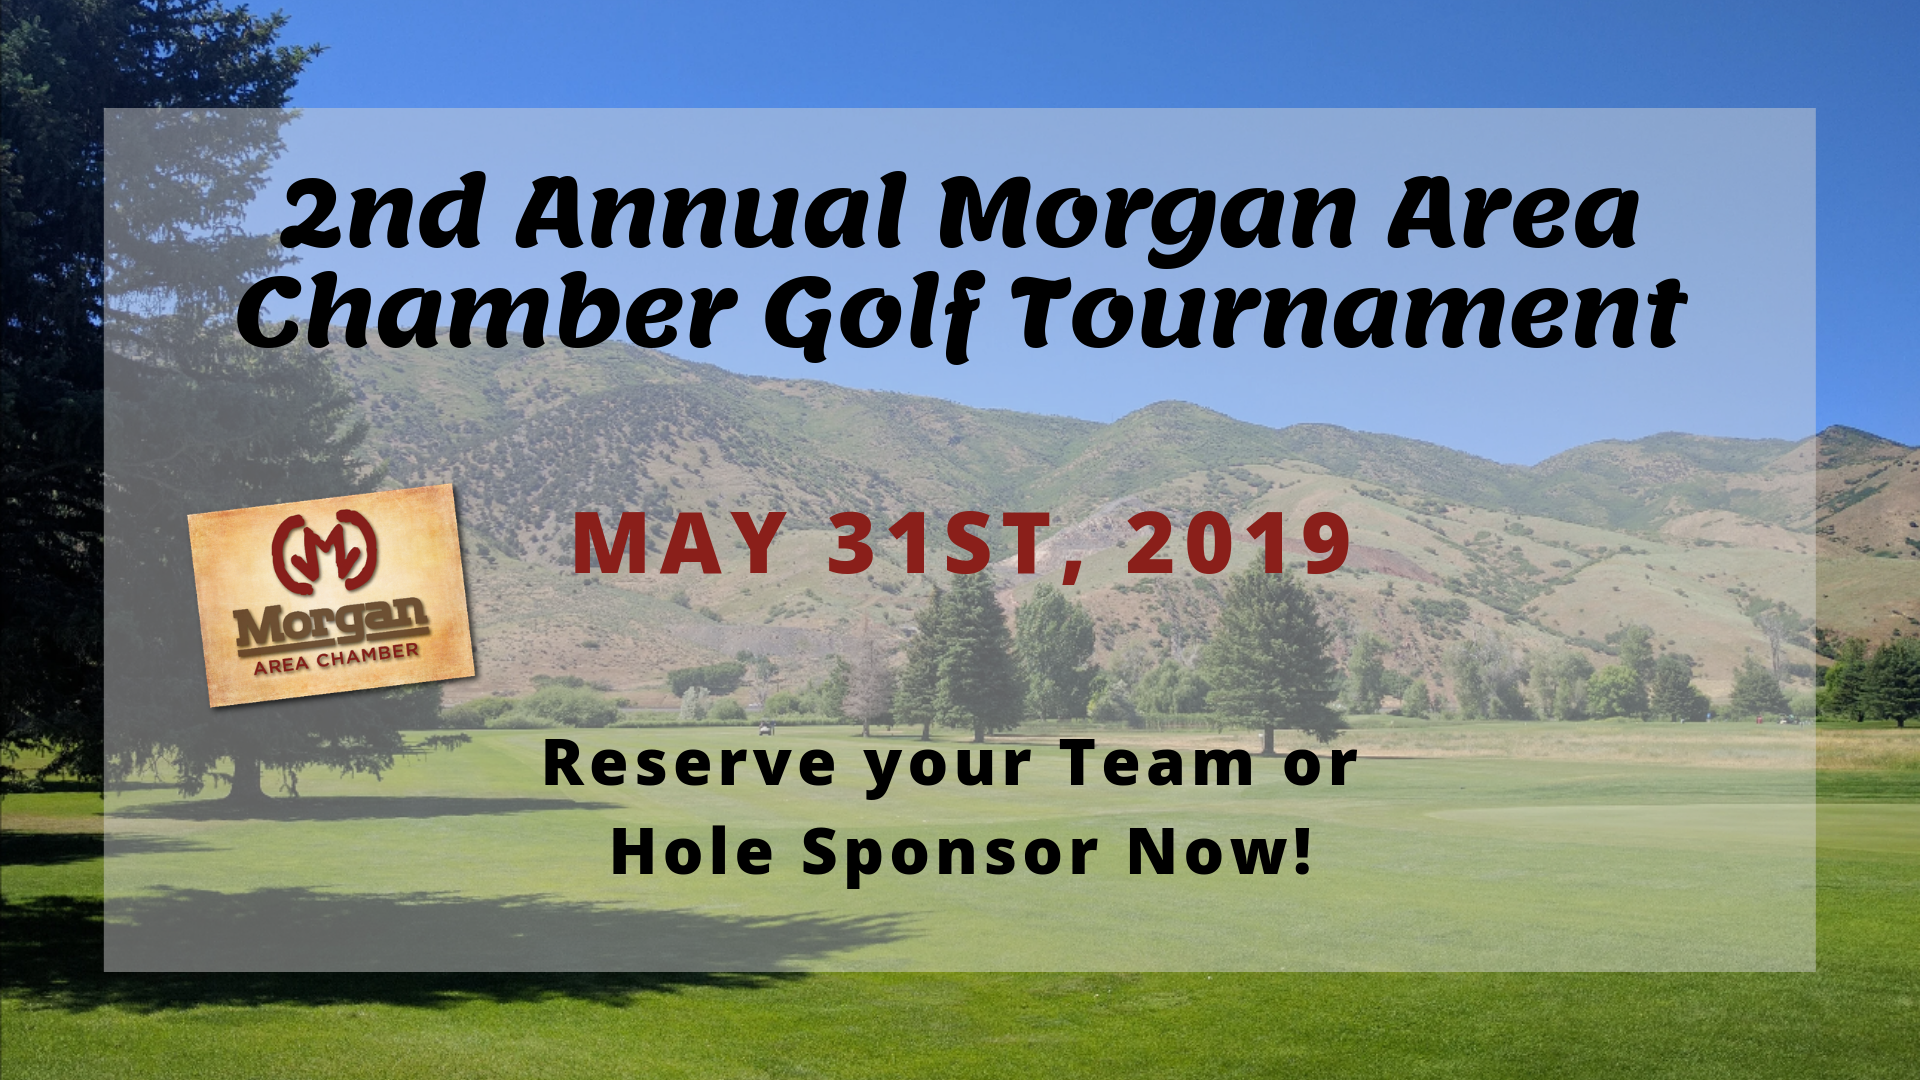 2nd Annual Morgan Area Chamber Golf Tournament